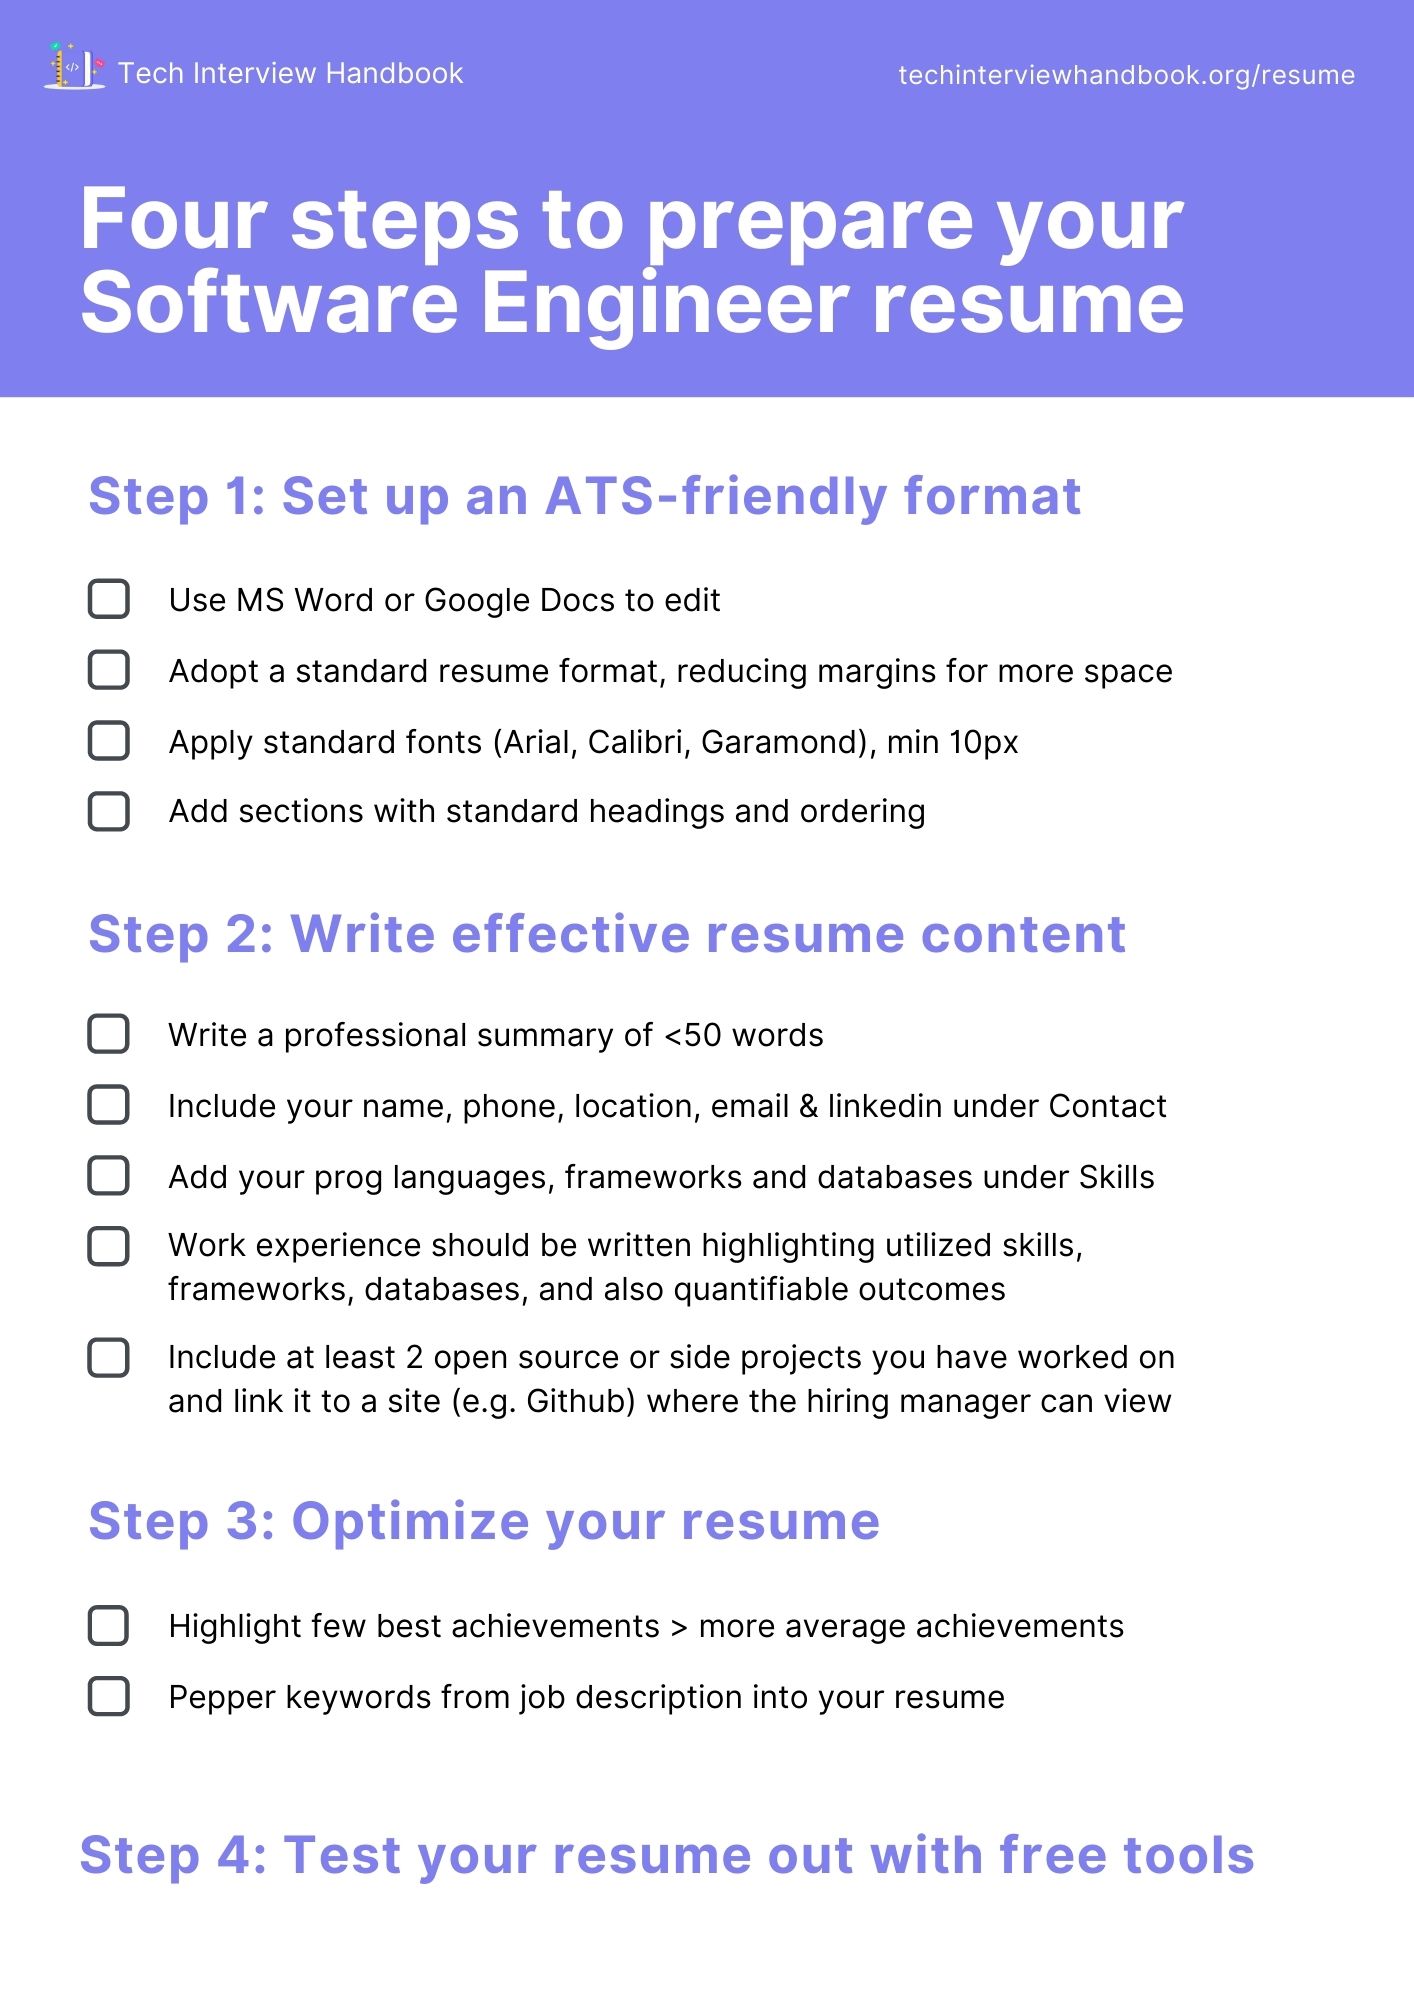 Summary of the 4 steps to create a great software engineering resume, in checklist format